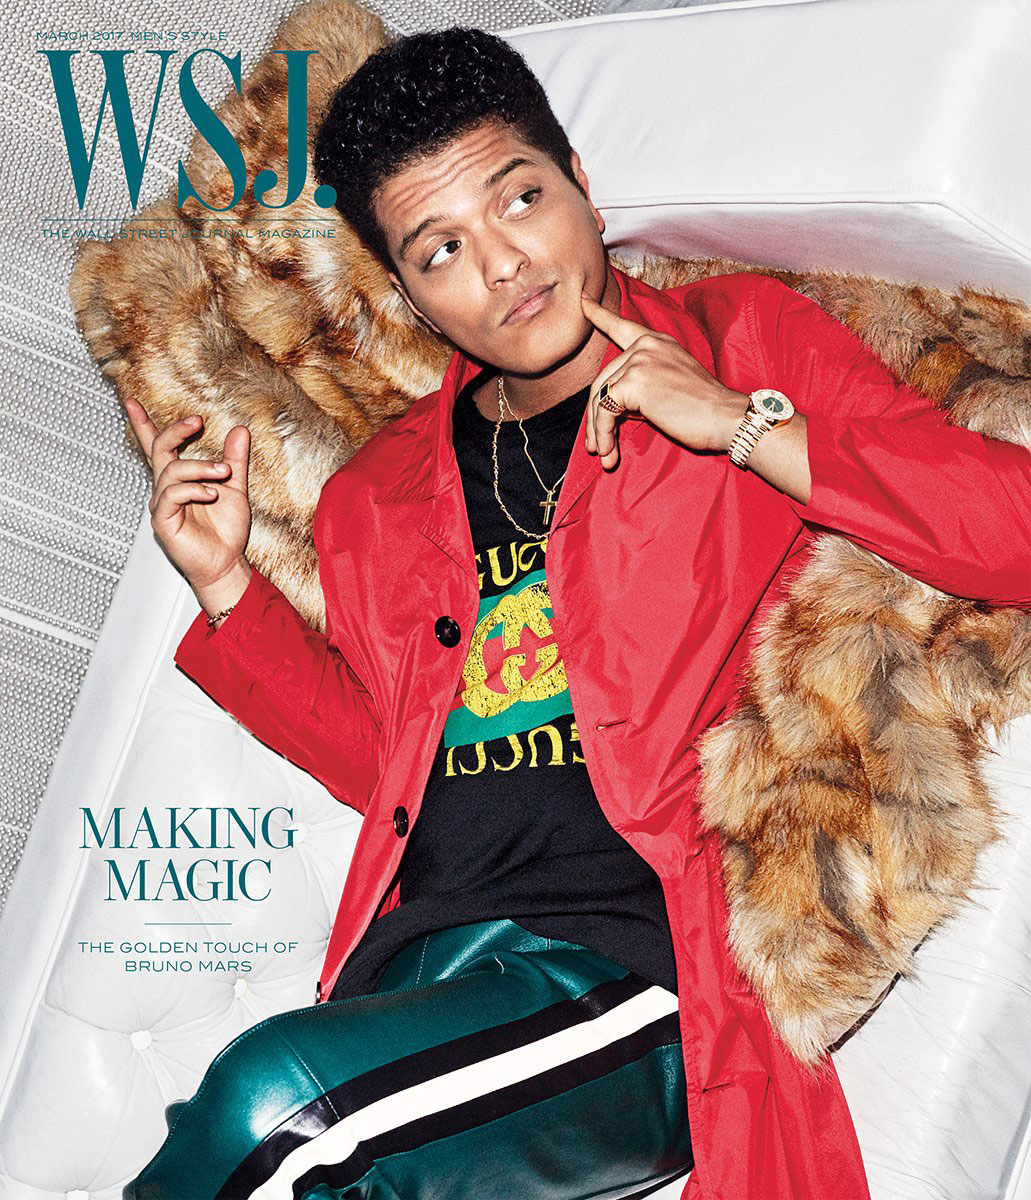 SPOTTED: Bruno Mars In Gucci T-Shirt & Tommy Hilfiger Jacket For Wall Street Journal